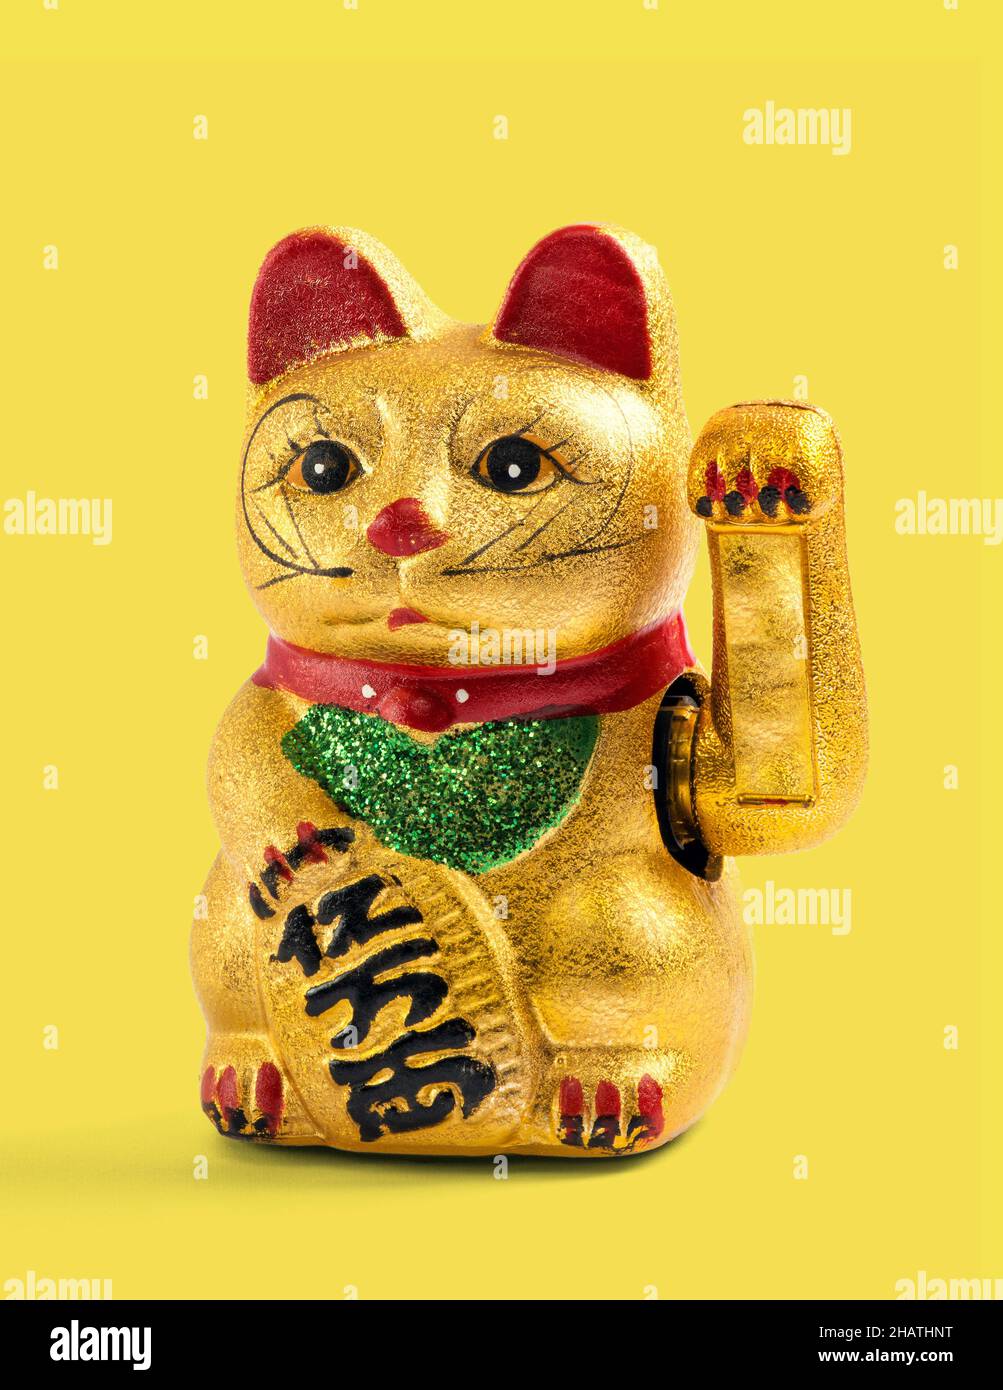 Gilded Chinese, Asian or Feng Shui lucky charm cat with a paw raised in greeting denoting wealth and prosperity over a yellow background Stock Photo